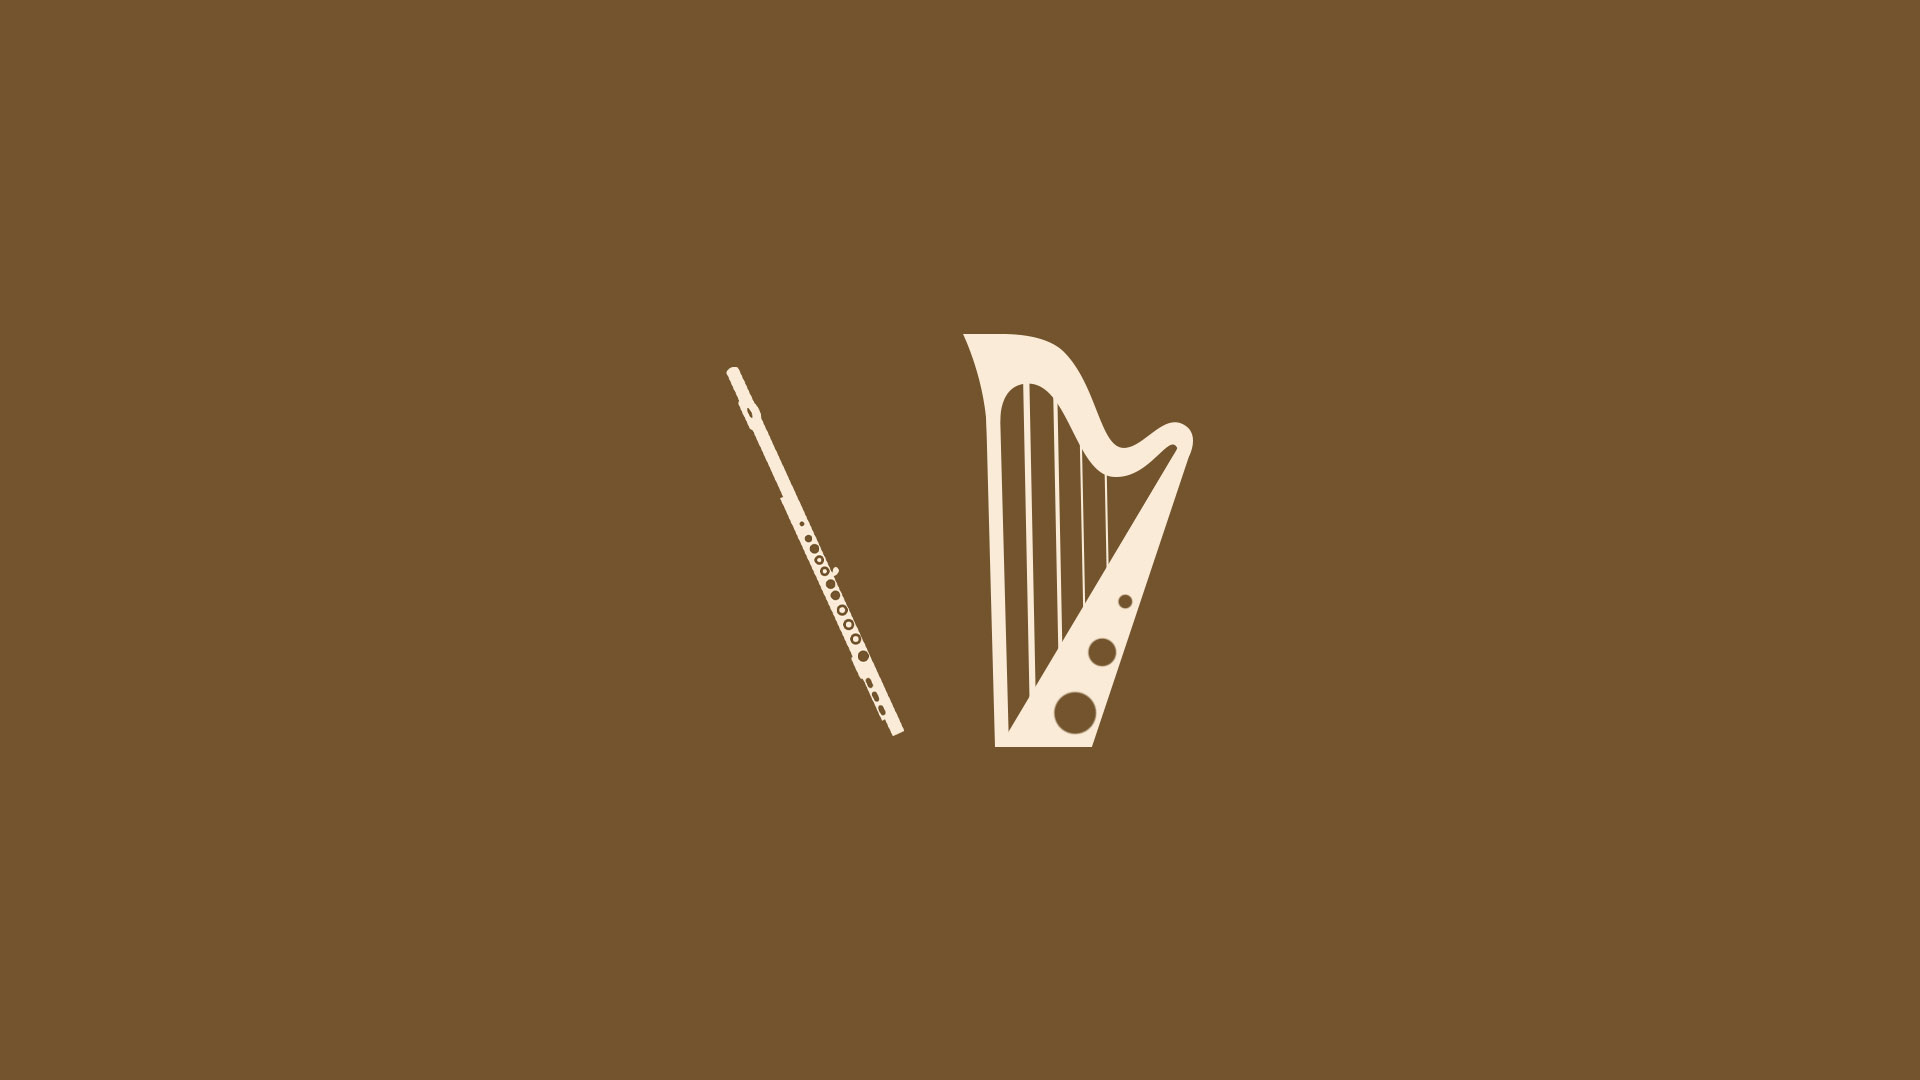 Concert harp and flute - temporary placeholder image artificially generated with Dall-E